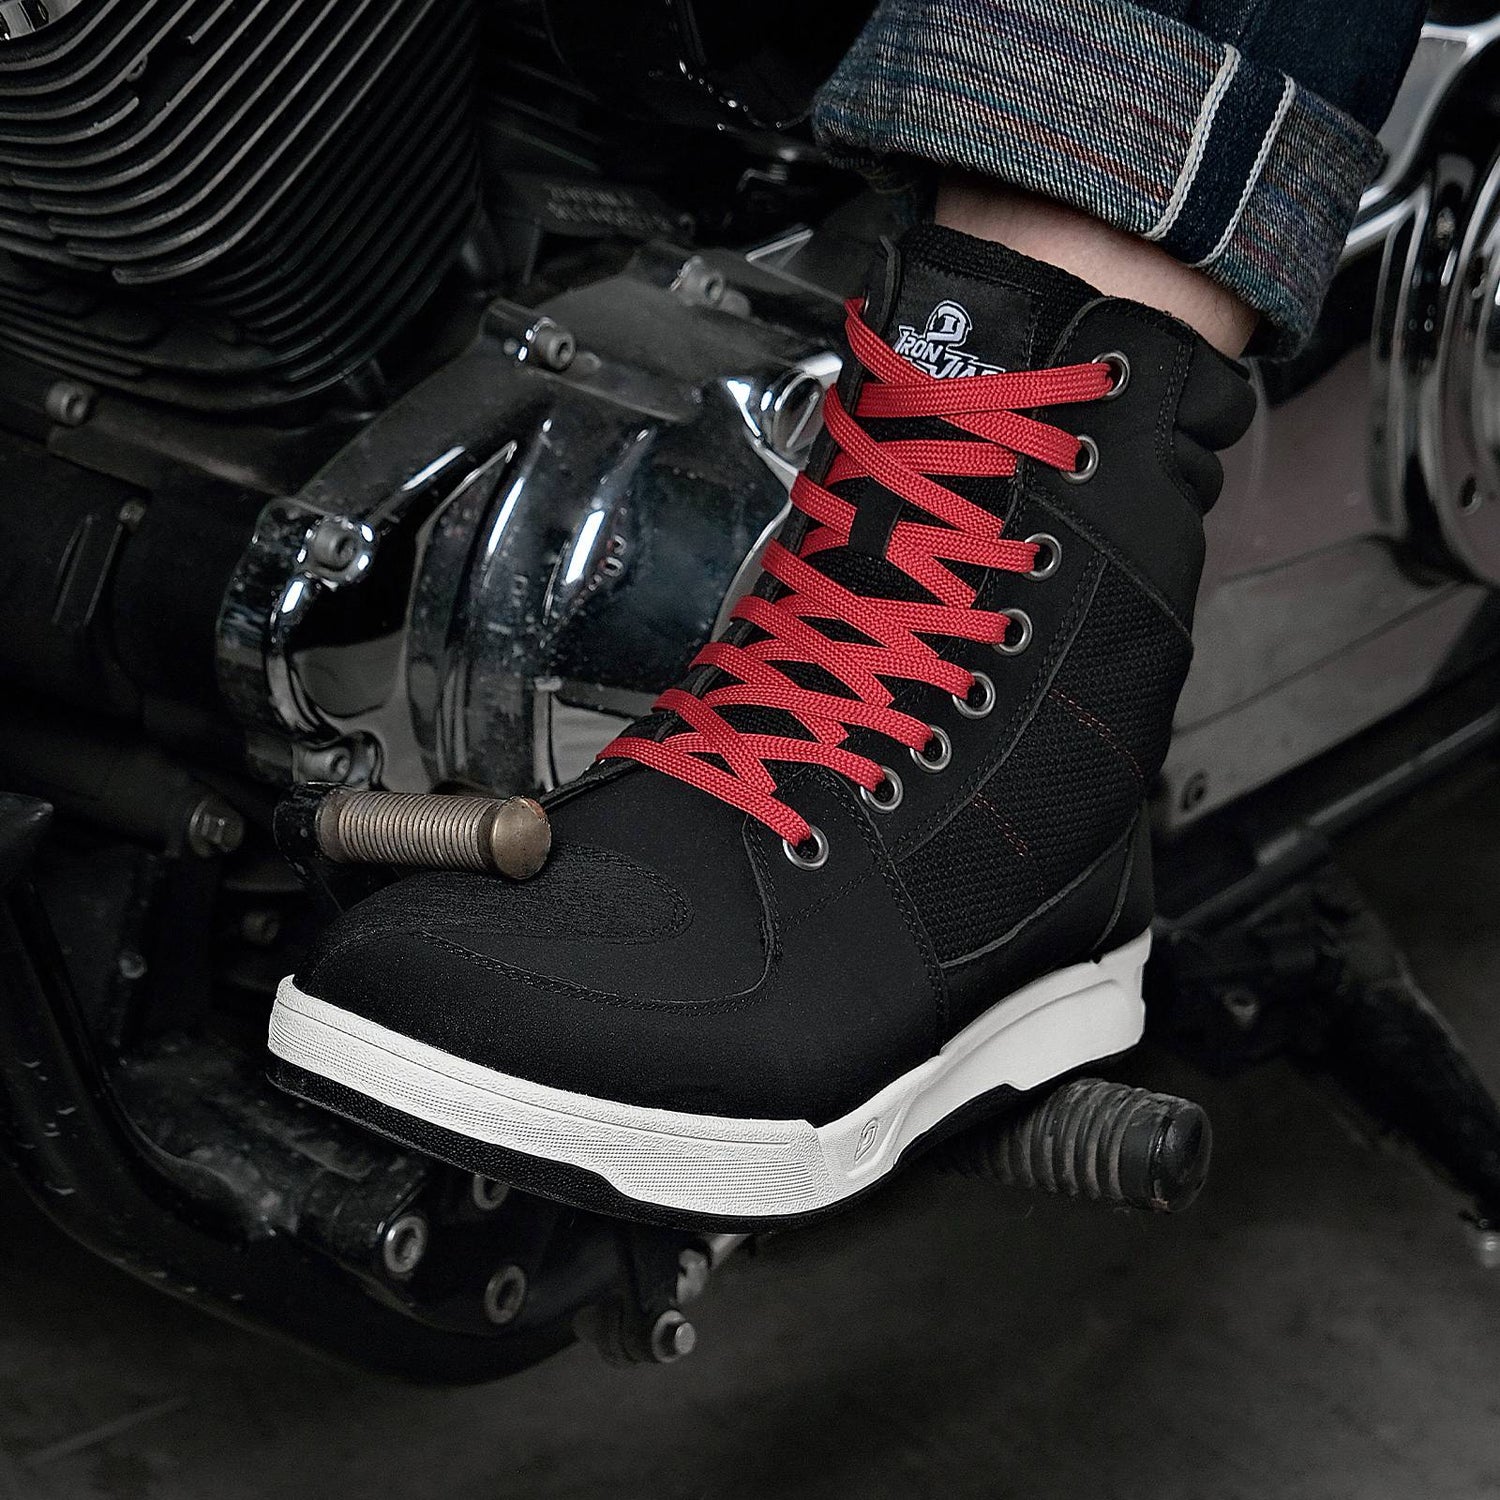 Black Breathable Motorcycle protective Shoes